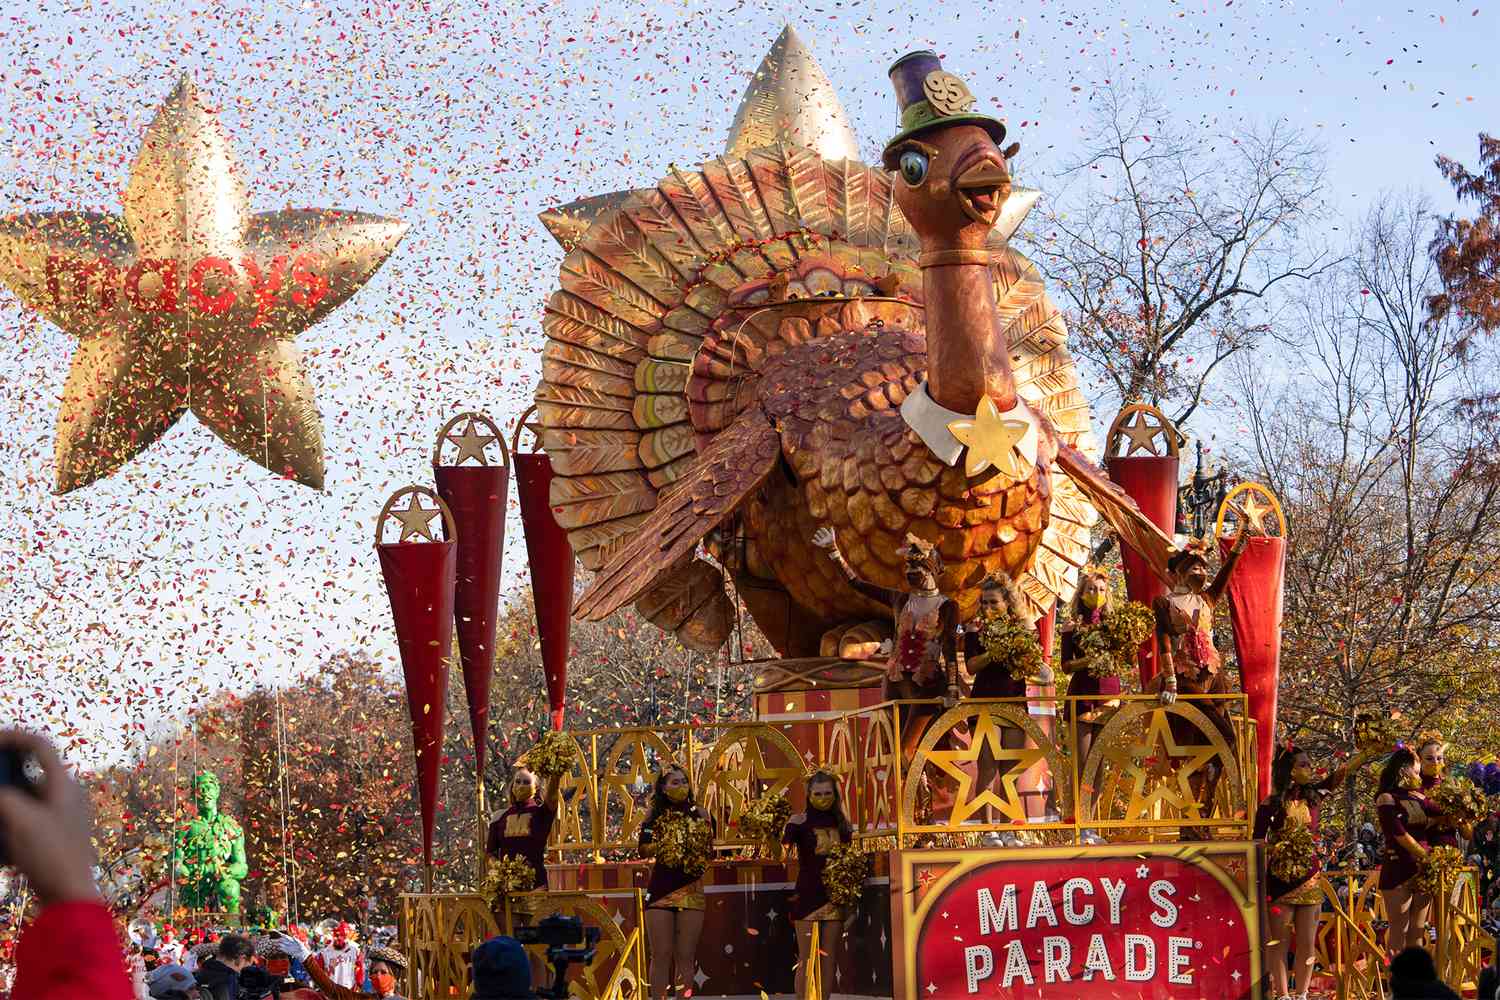 How To Watch Macy’s Thanksgiving Day Parade